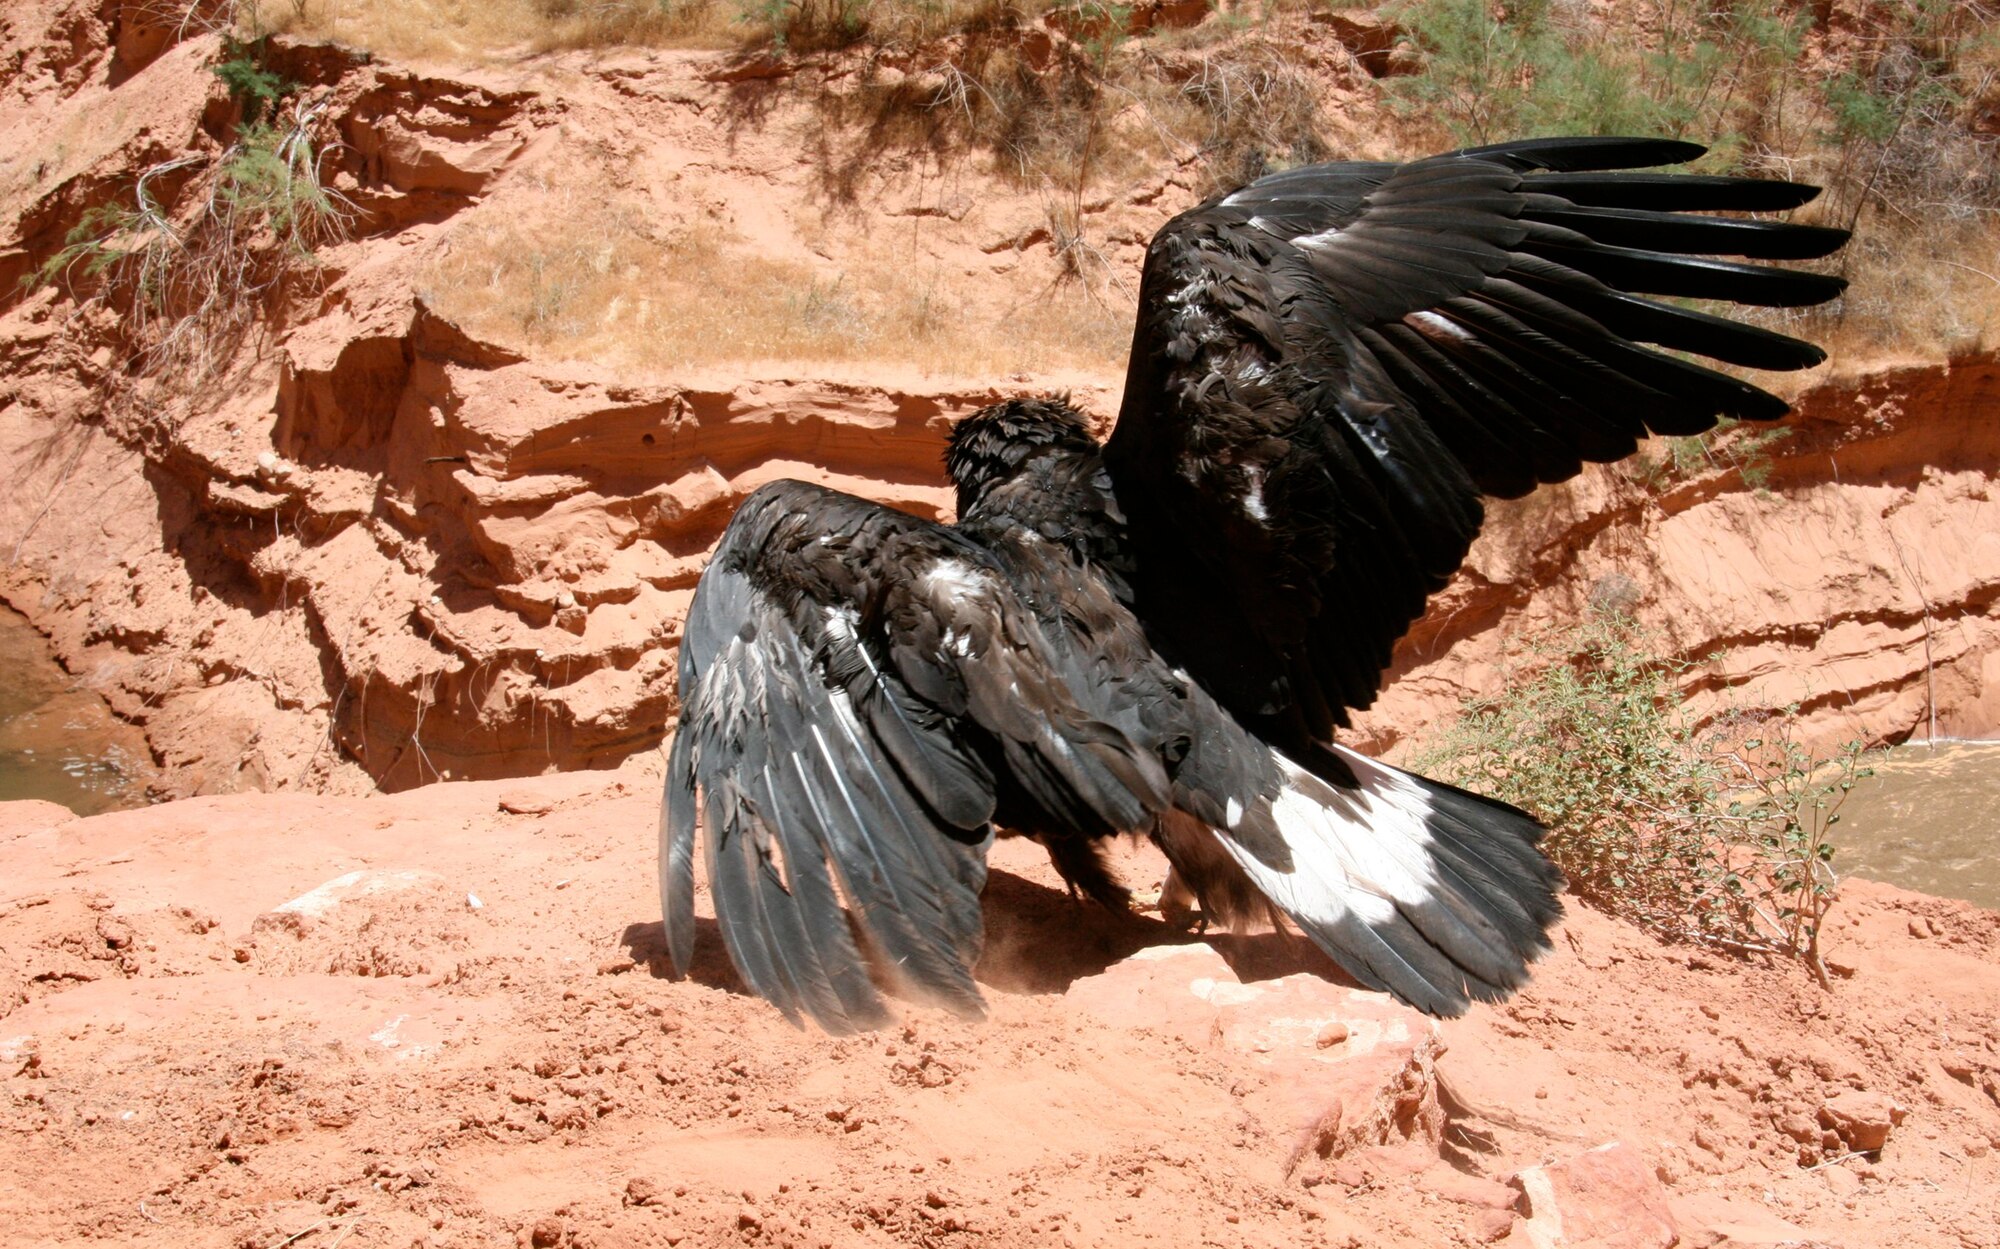 Cliff, the rescued Golden Eagle, attempts to take off but is unable due to an injured left wing.